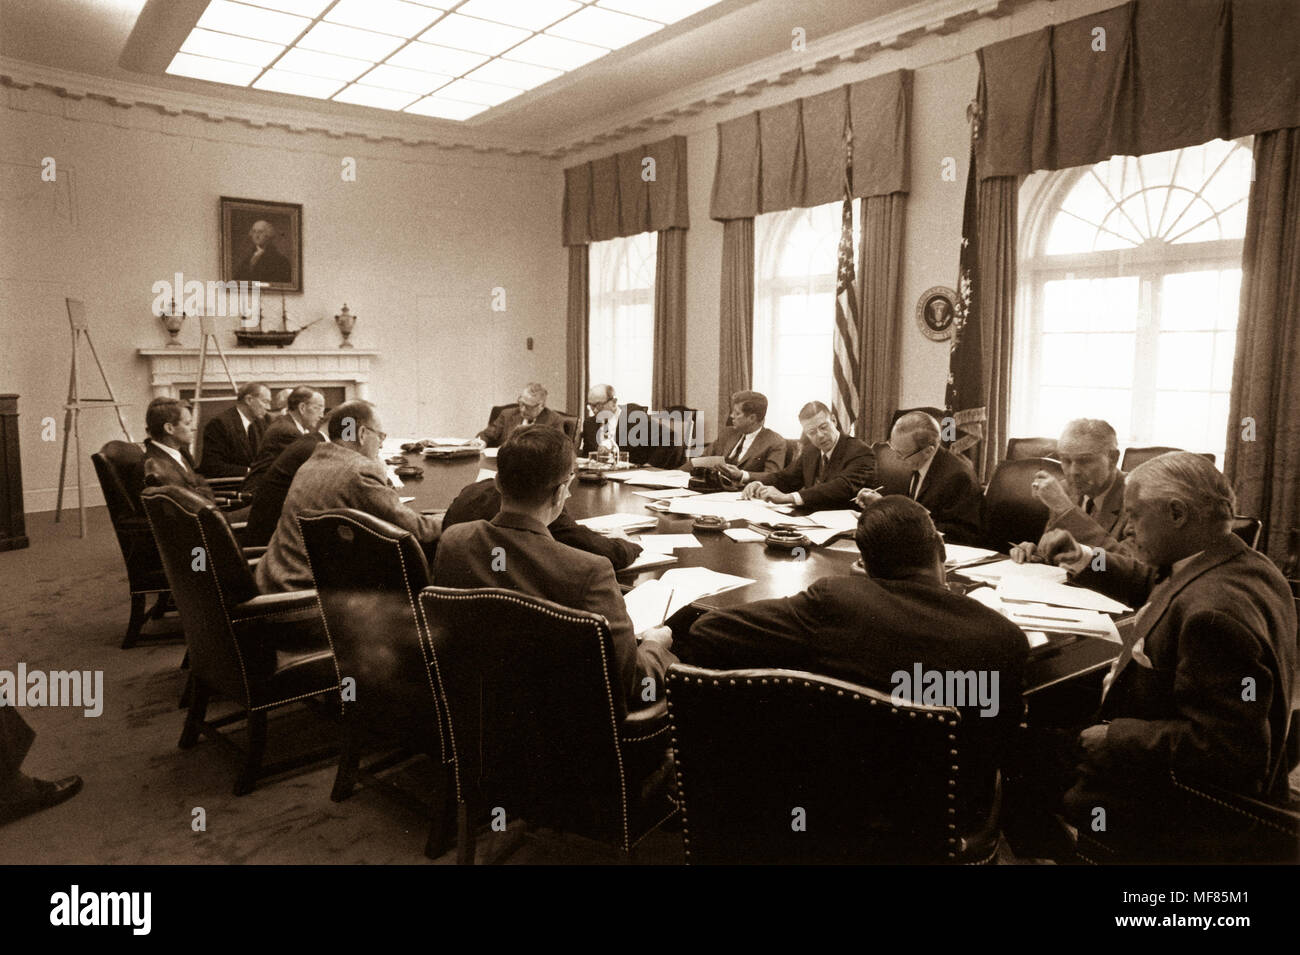 ST-A26-1-62   29 October 1962 Meeting of the Executive Committee of the National Security Council EXCOMM.  White House, Cabinet Room, 29 October 1962.  Clockwise from the President: President Kennedy, Robert McNamara, Roswell Gilpatric, General Maxwell Taylor, Paul Nitze, Donald Wilson, Ted Sorensen, McGeorge Bundy (hidden), Douglas Dillon, Vice President Lyndon Baines Johnson (hidden), Robert F. Kennedy, Llewellyn Thompson, William C. Foster, John McCone (hidden), George Ball, Dean Rusk. Photograph in the John F. Kennedy Presidential Library and Museum, Boston. Stock Photo